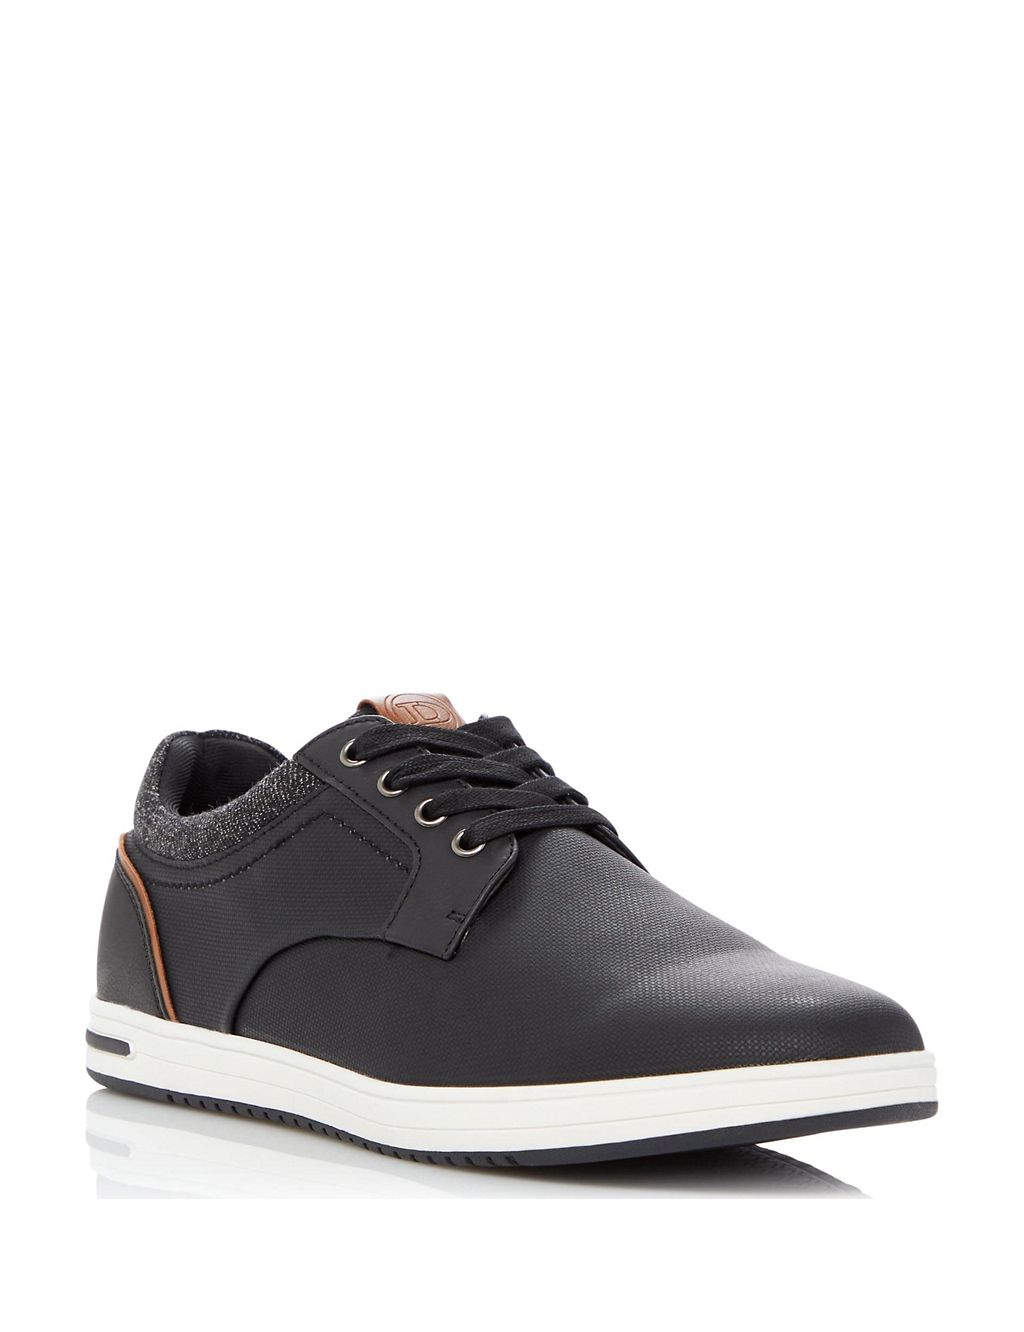 Lace Up Trainers | Dune London | M&S